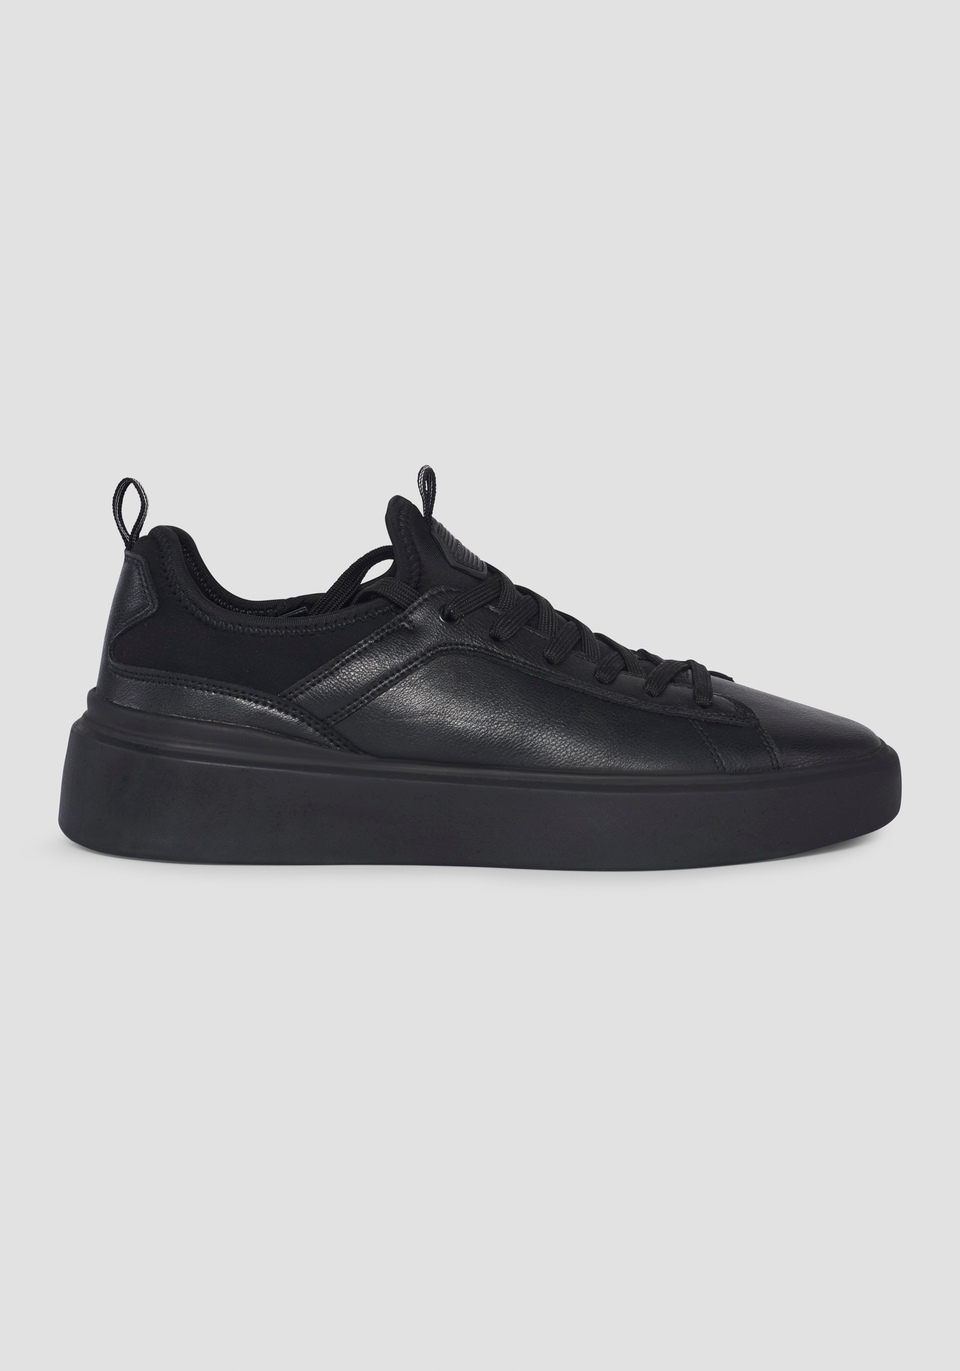 "BARNET" SNEAKER IN FAUX LEATHER AND TECHNICAL FABRIC - Antony Morato Online Shop